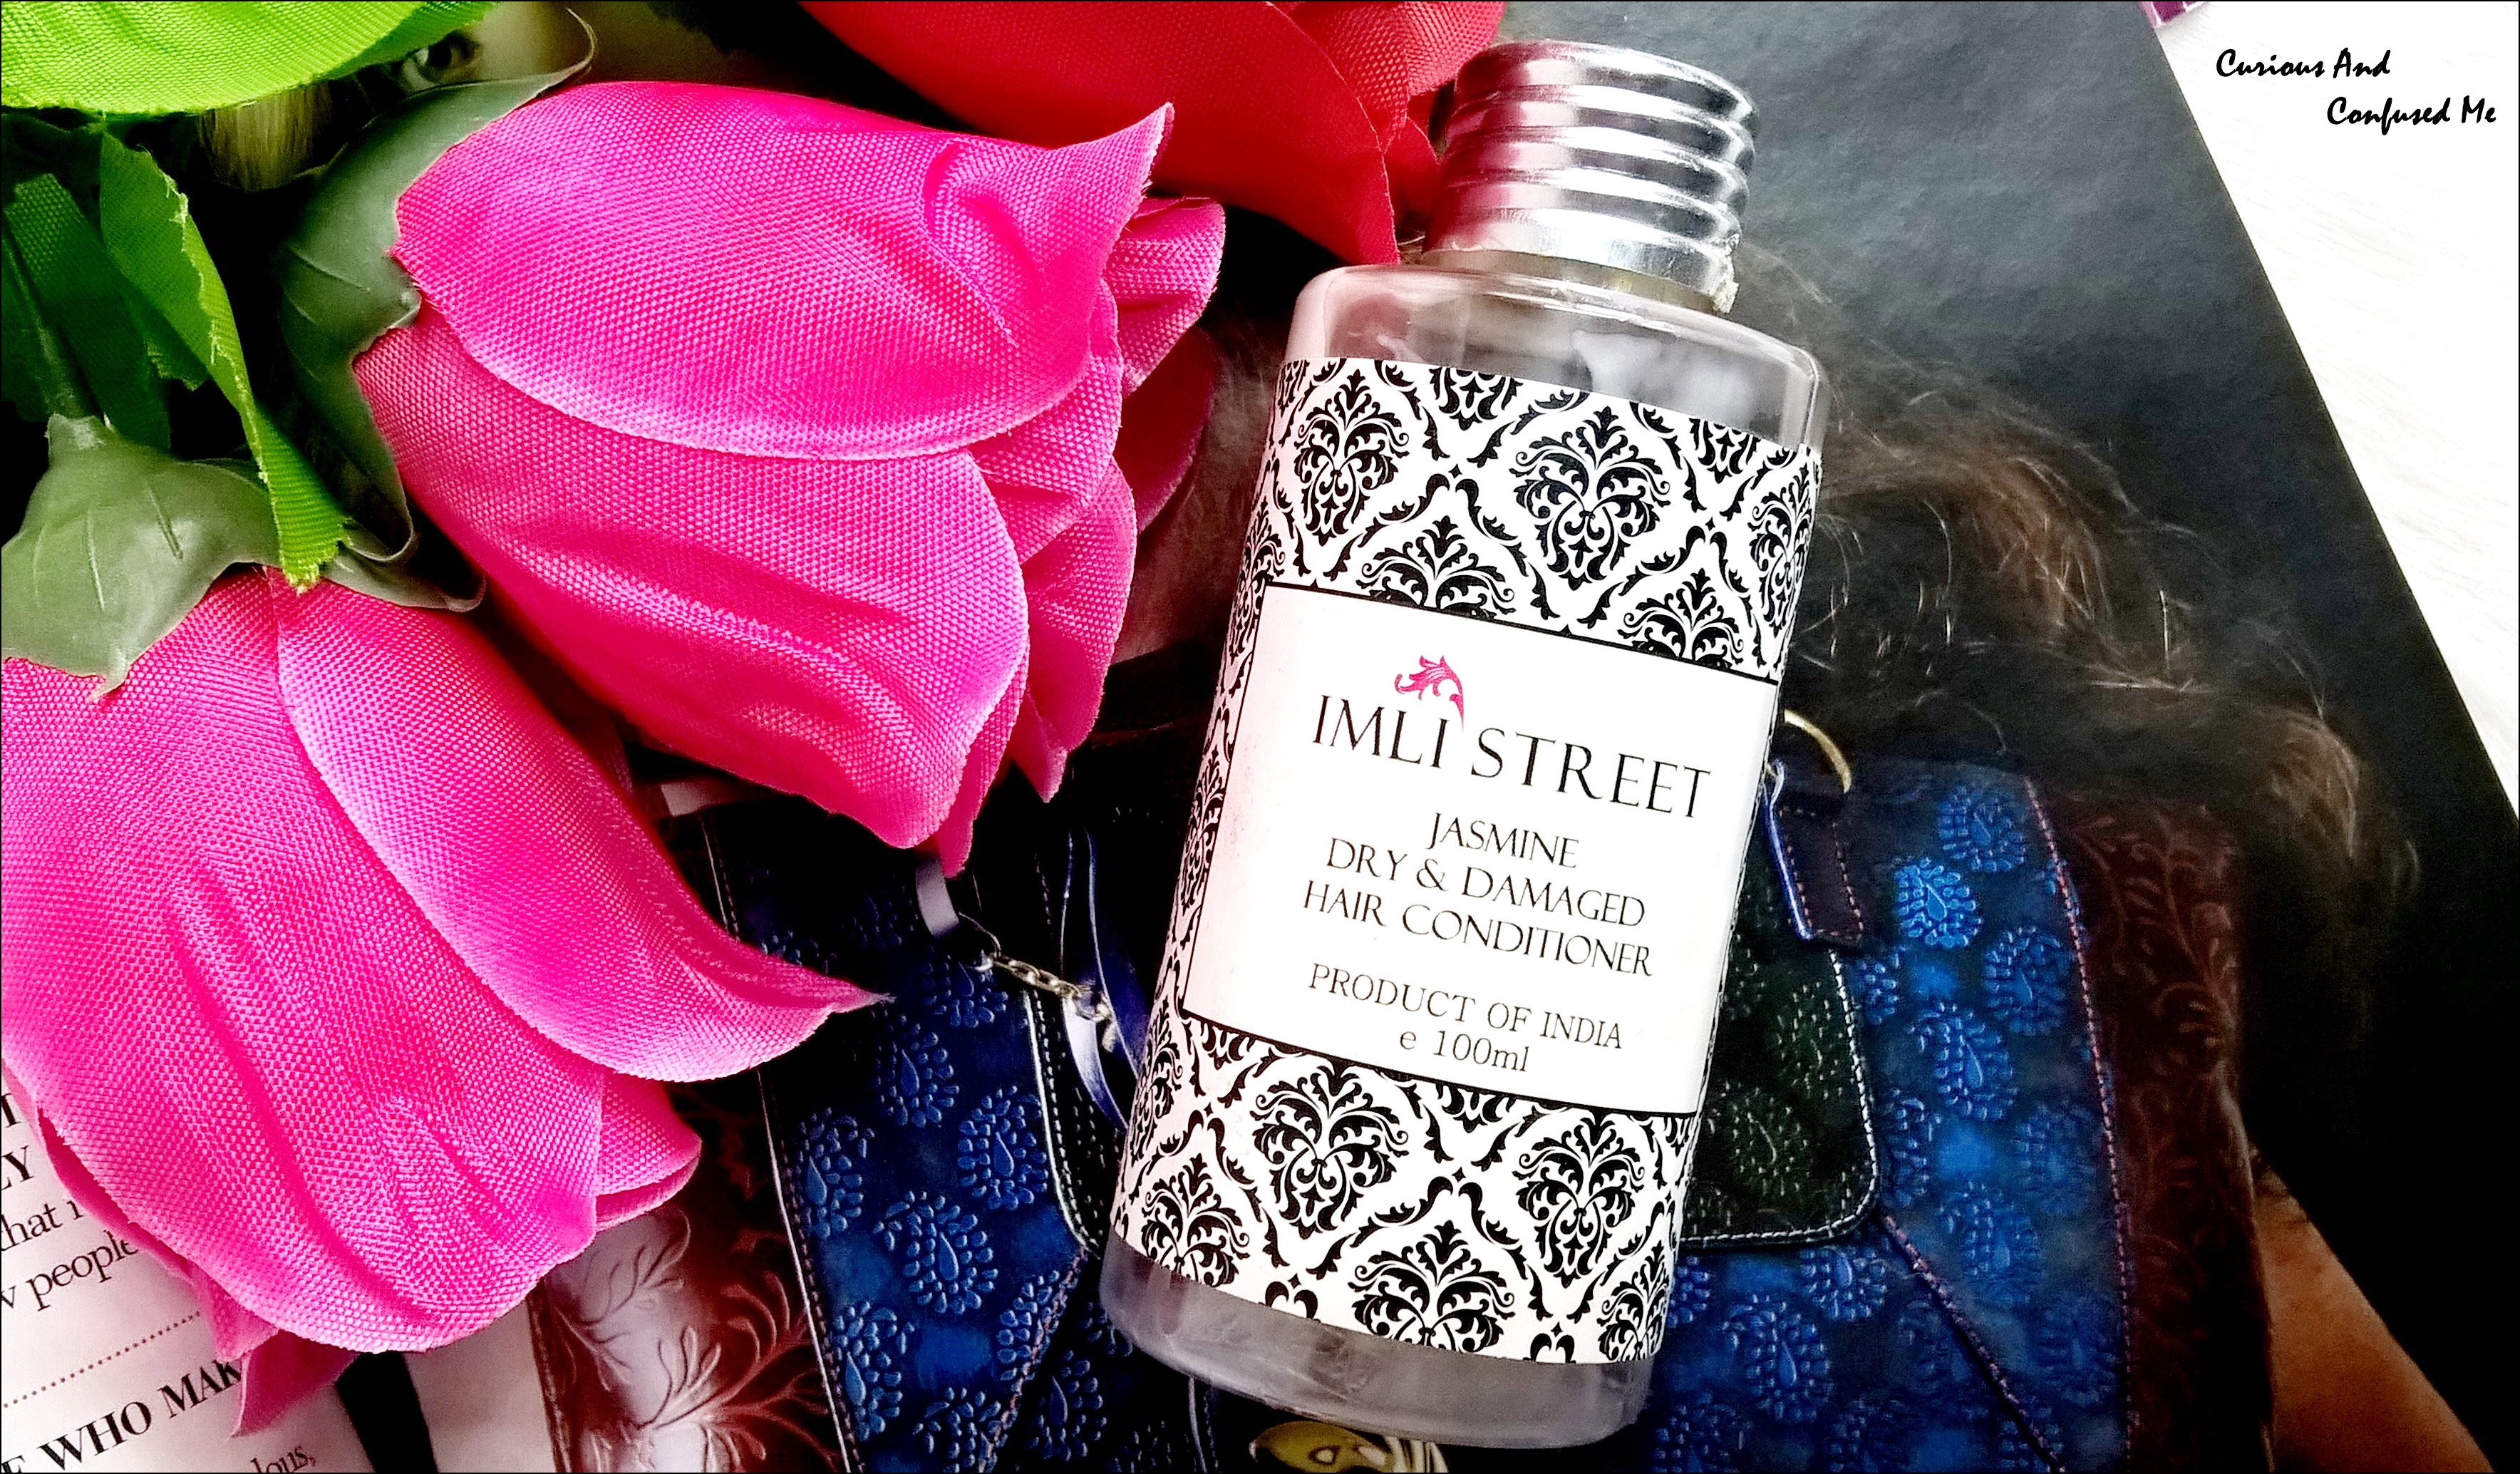 Imli Street Jasmine Dry and Damaged Hair Conditioner : Review